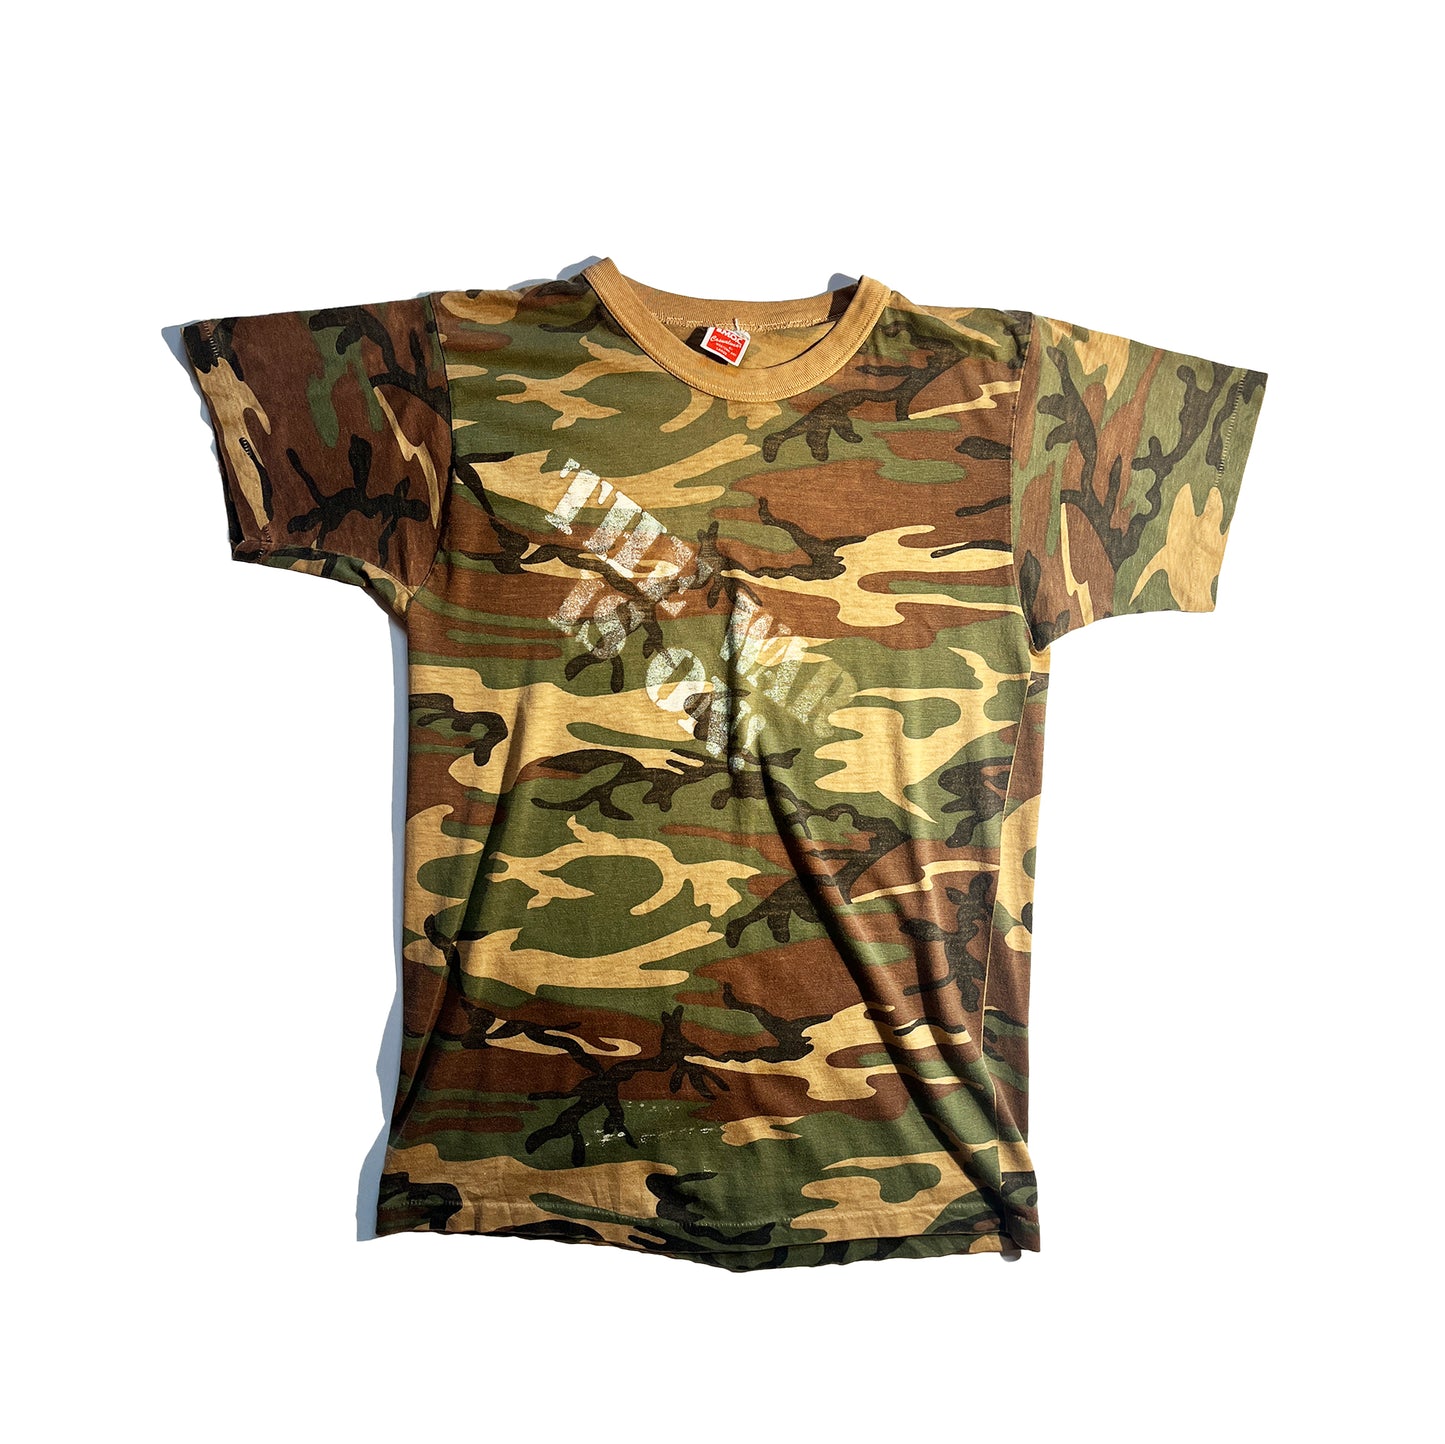 Vintage Camo T-Shirt The War Is On 50 50 Single Stitch USA Made